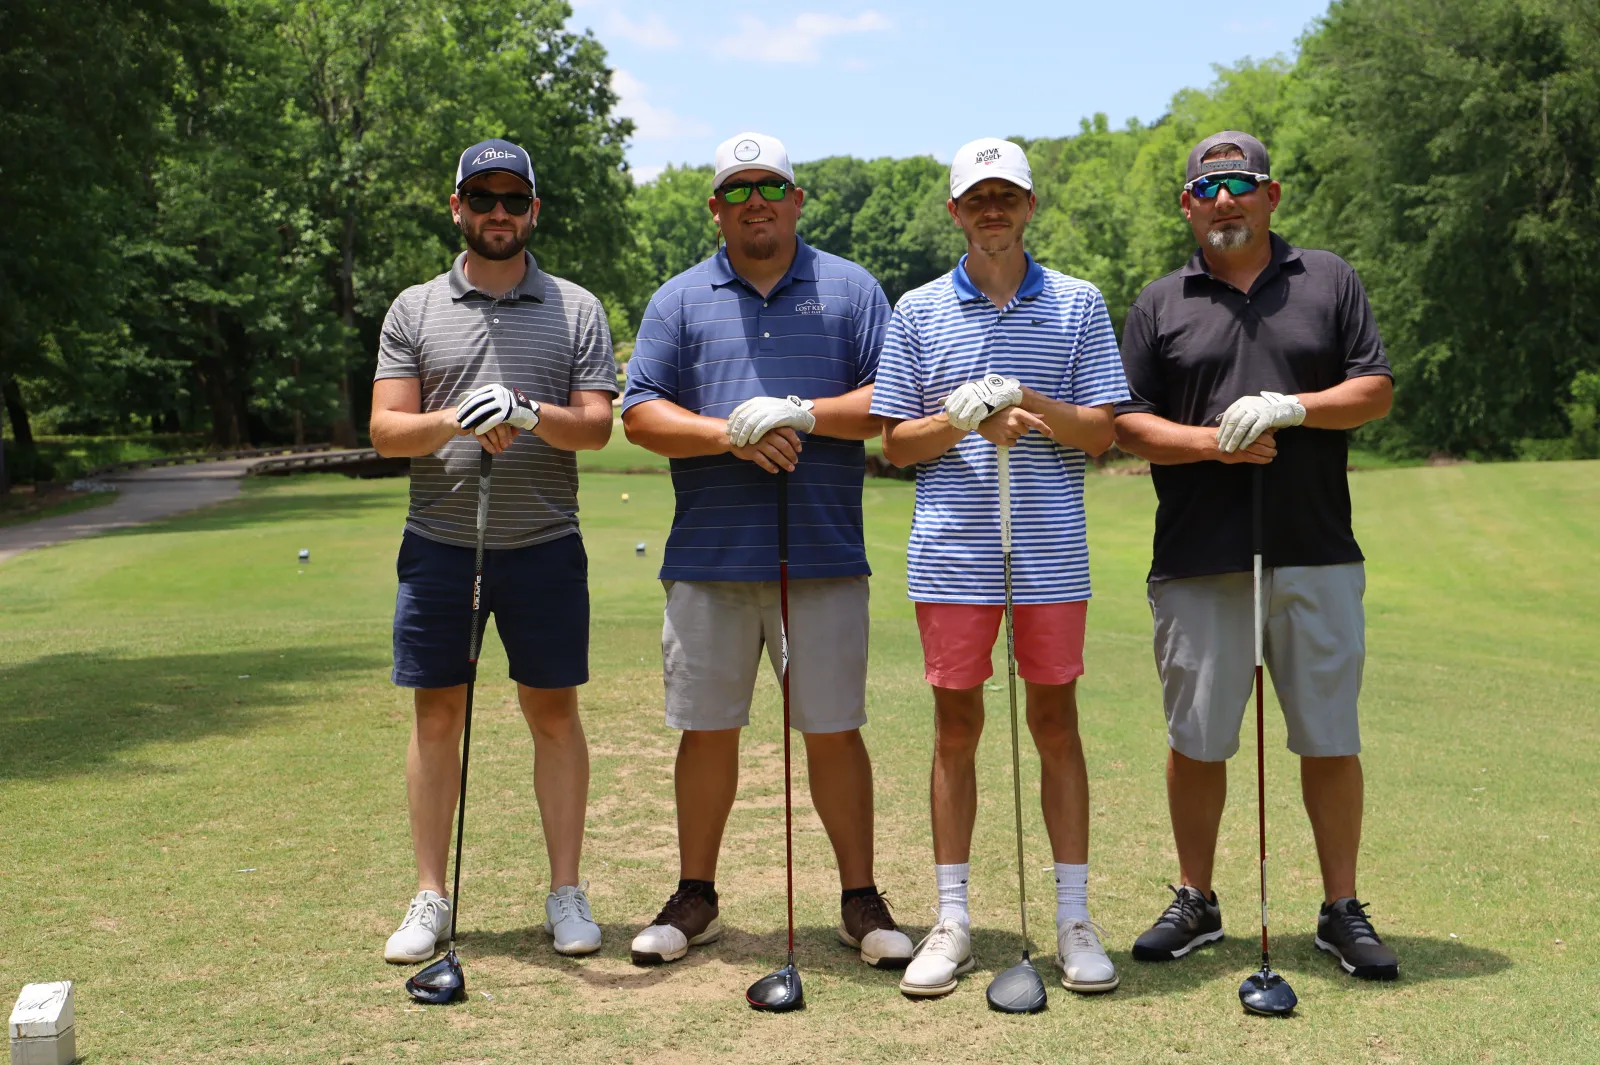 a group of men posing for a picture on a golf course